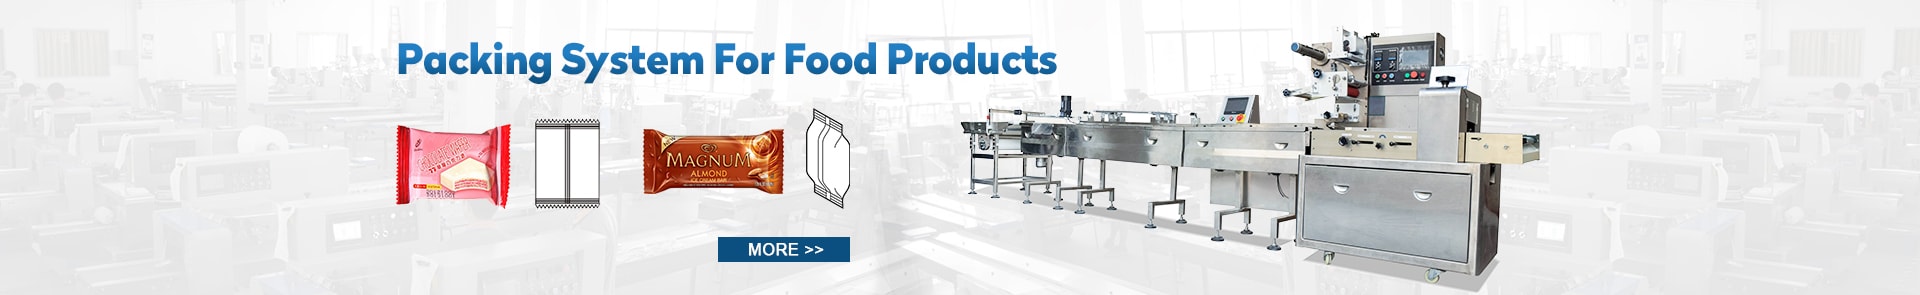 Packing system for food products